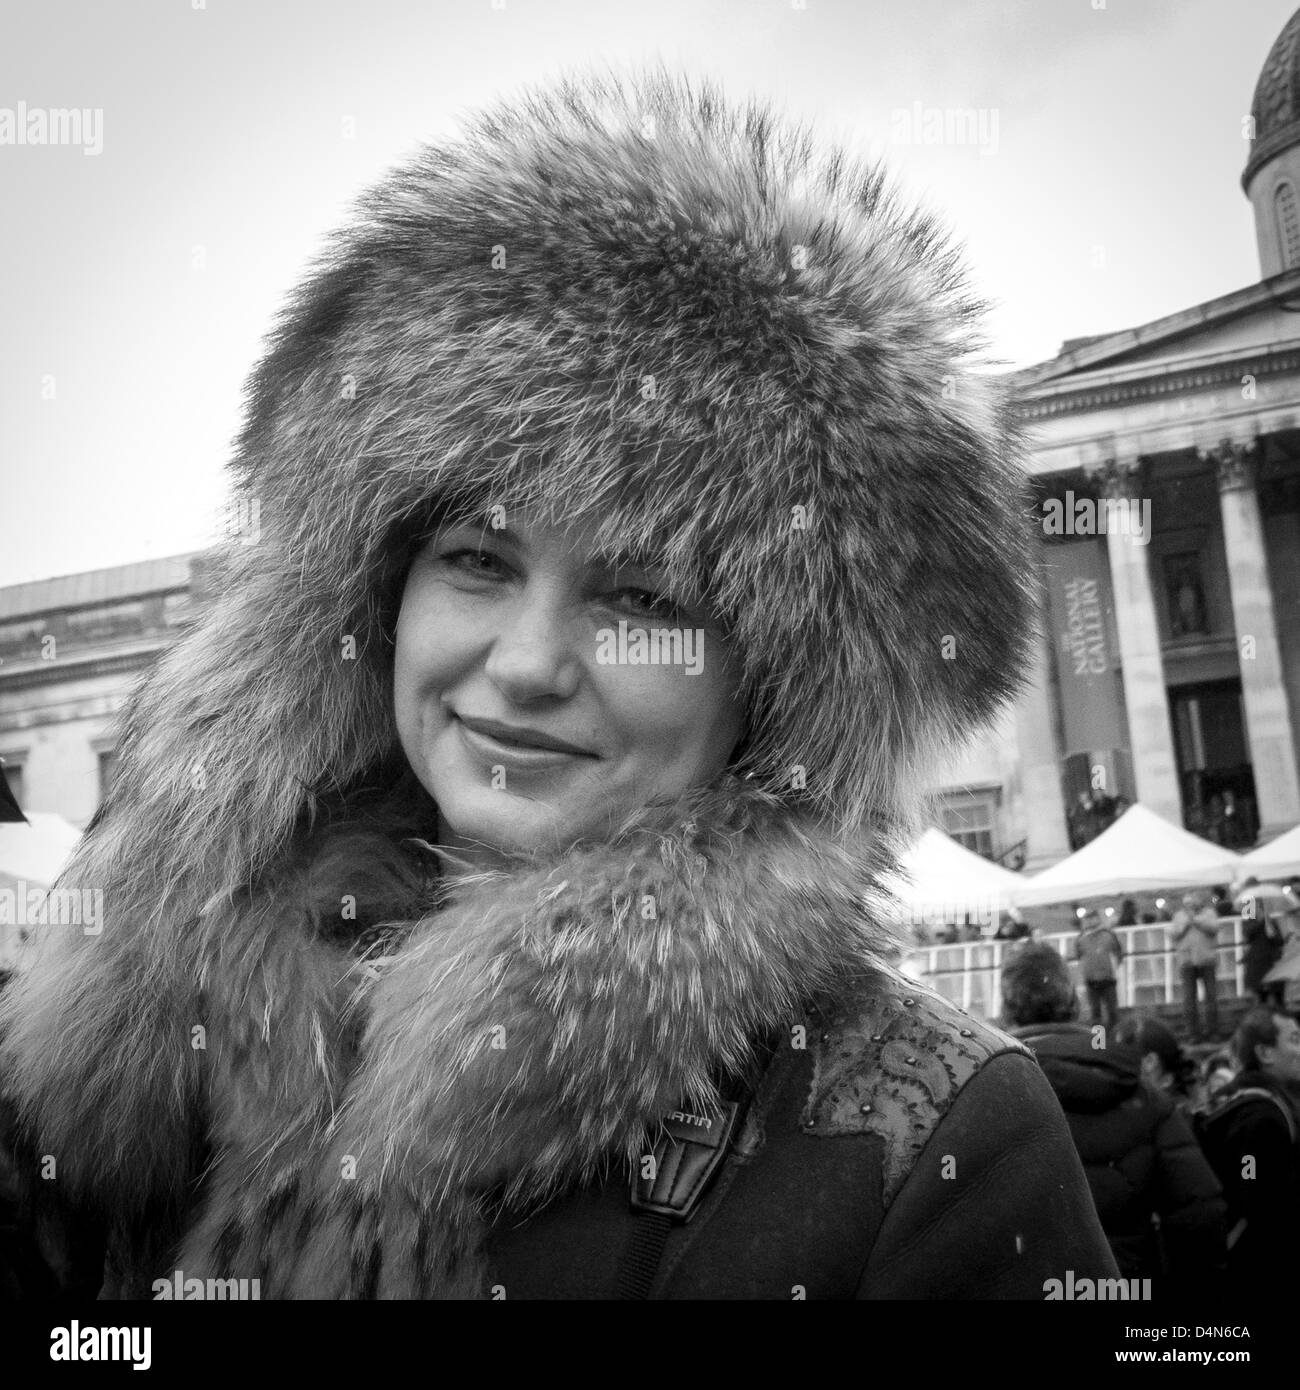 A woman in a a Russian fur hat at Maslenitsa, Russian Spring Festival, Trafalgar Square, London, 16 March 2013. Stock Photo